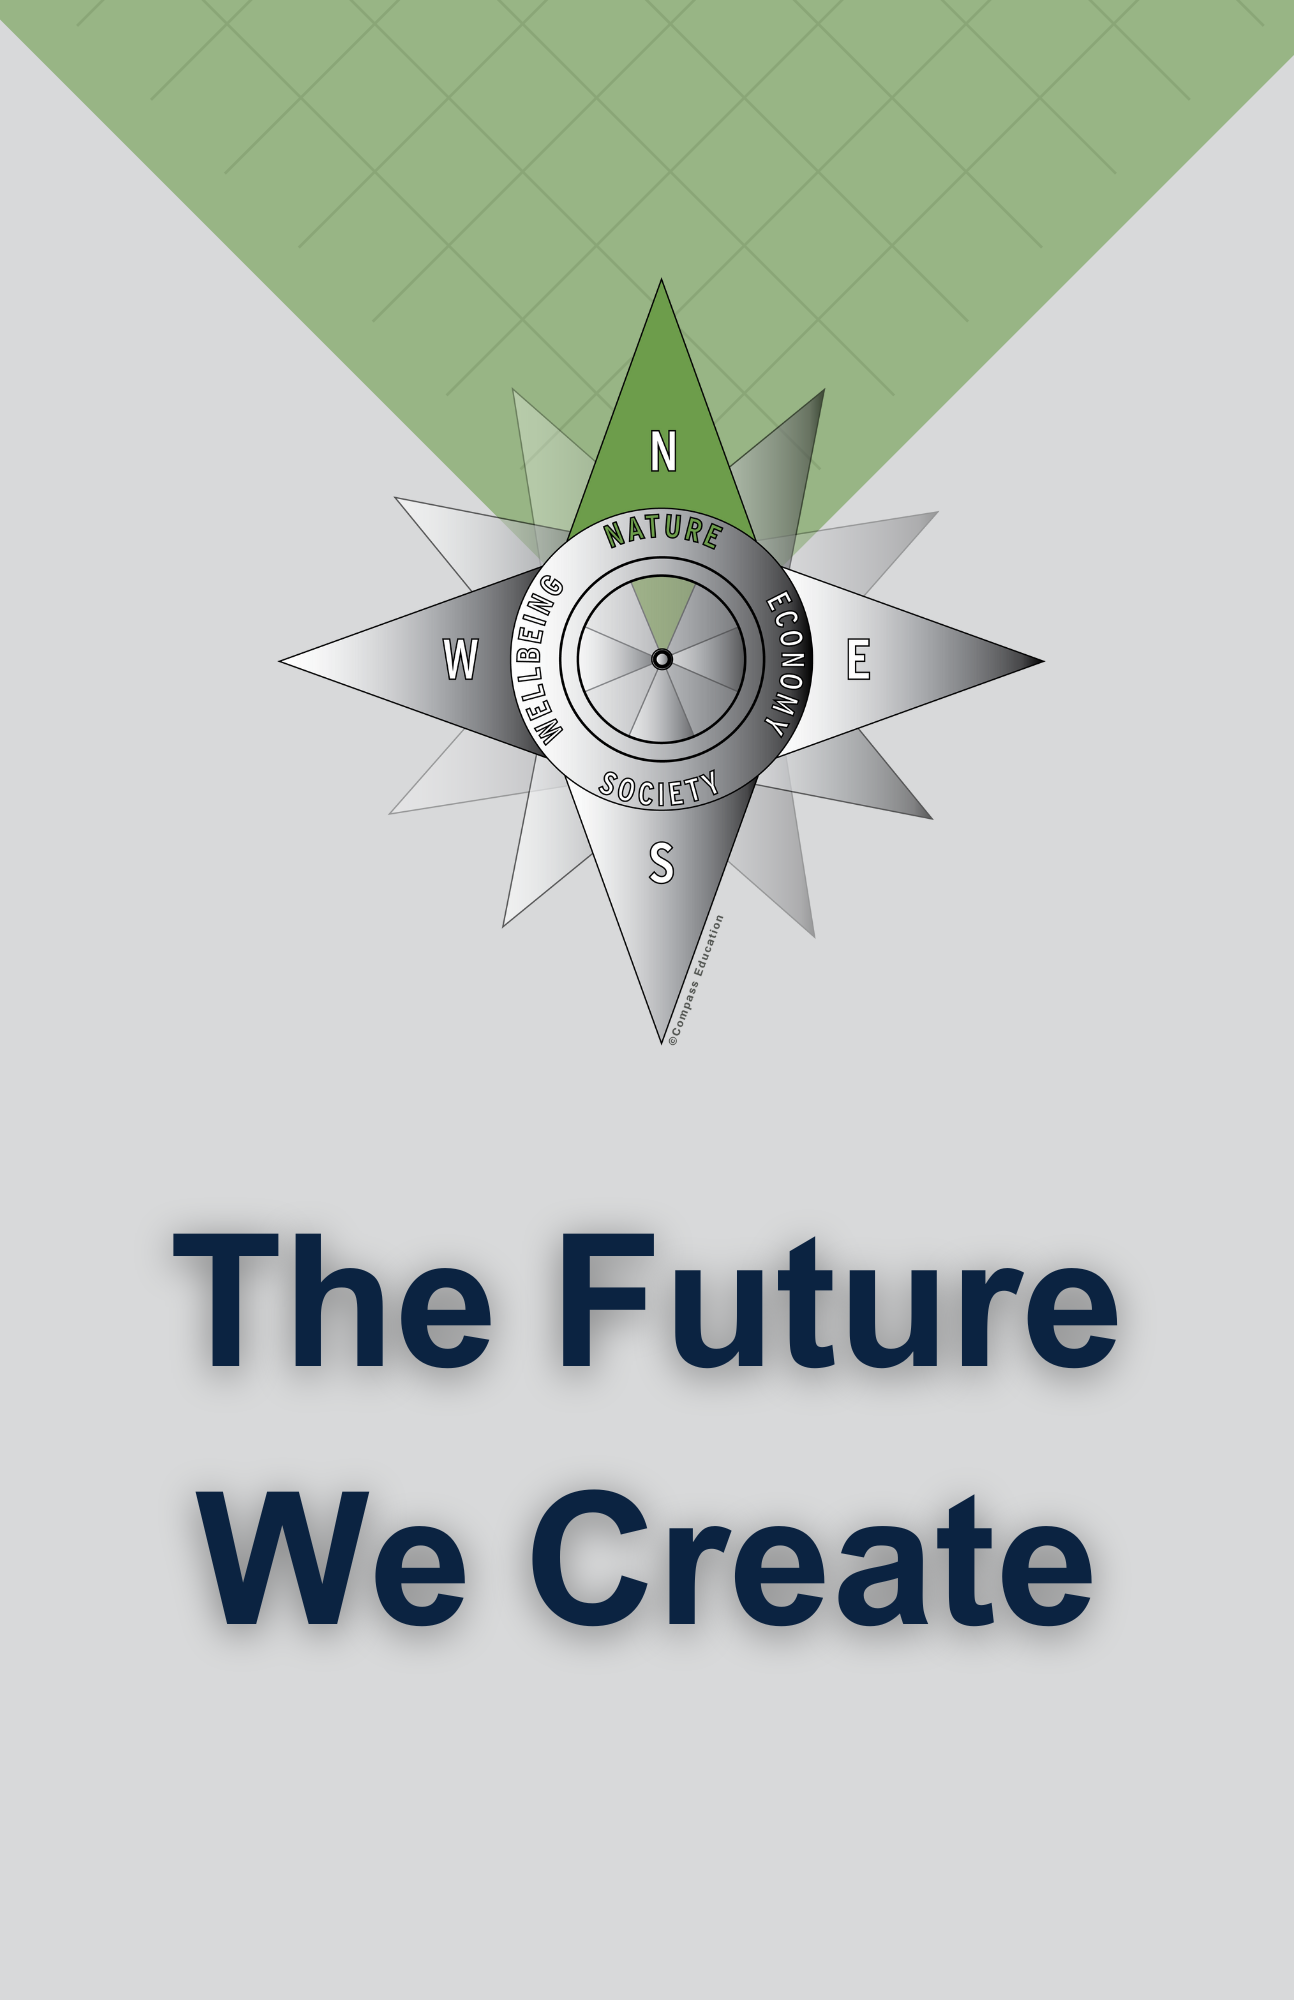 The Future We Create poster with the sustainability compass point (Nature) highlighted